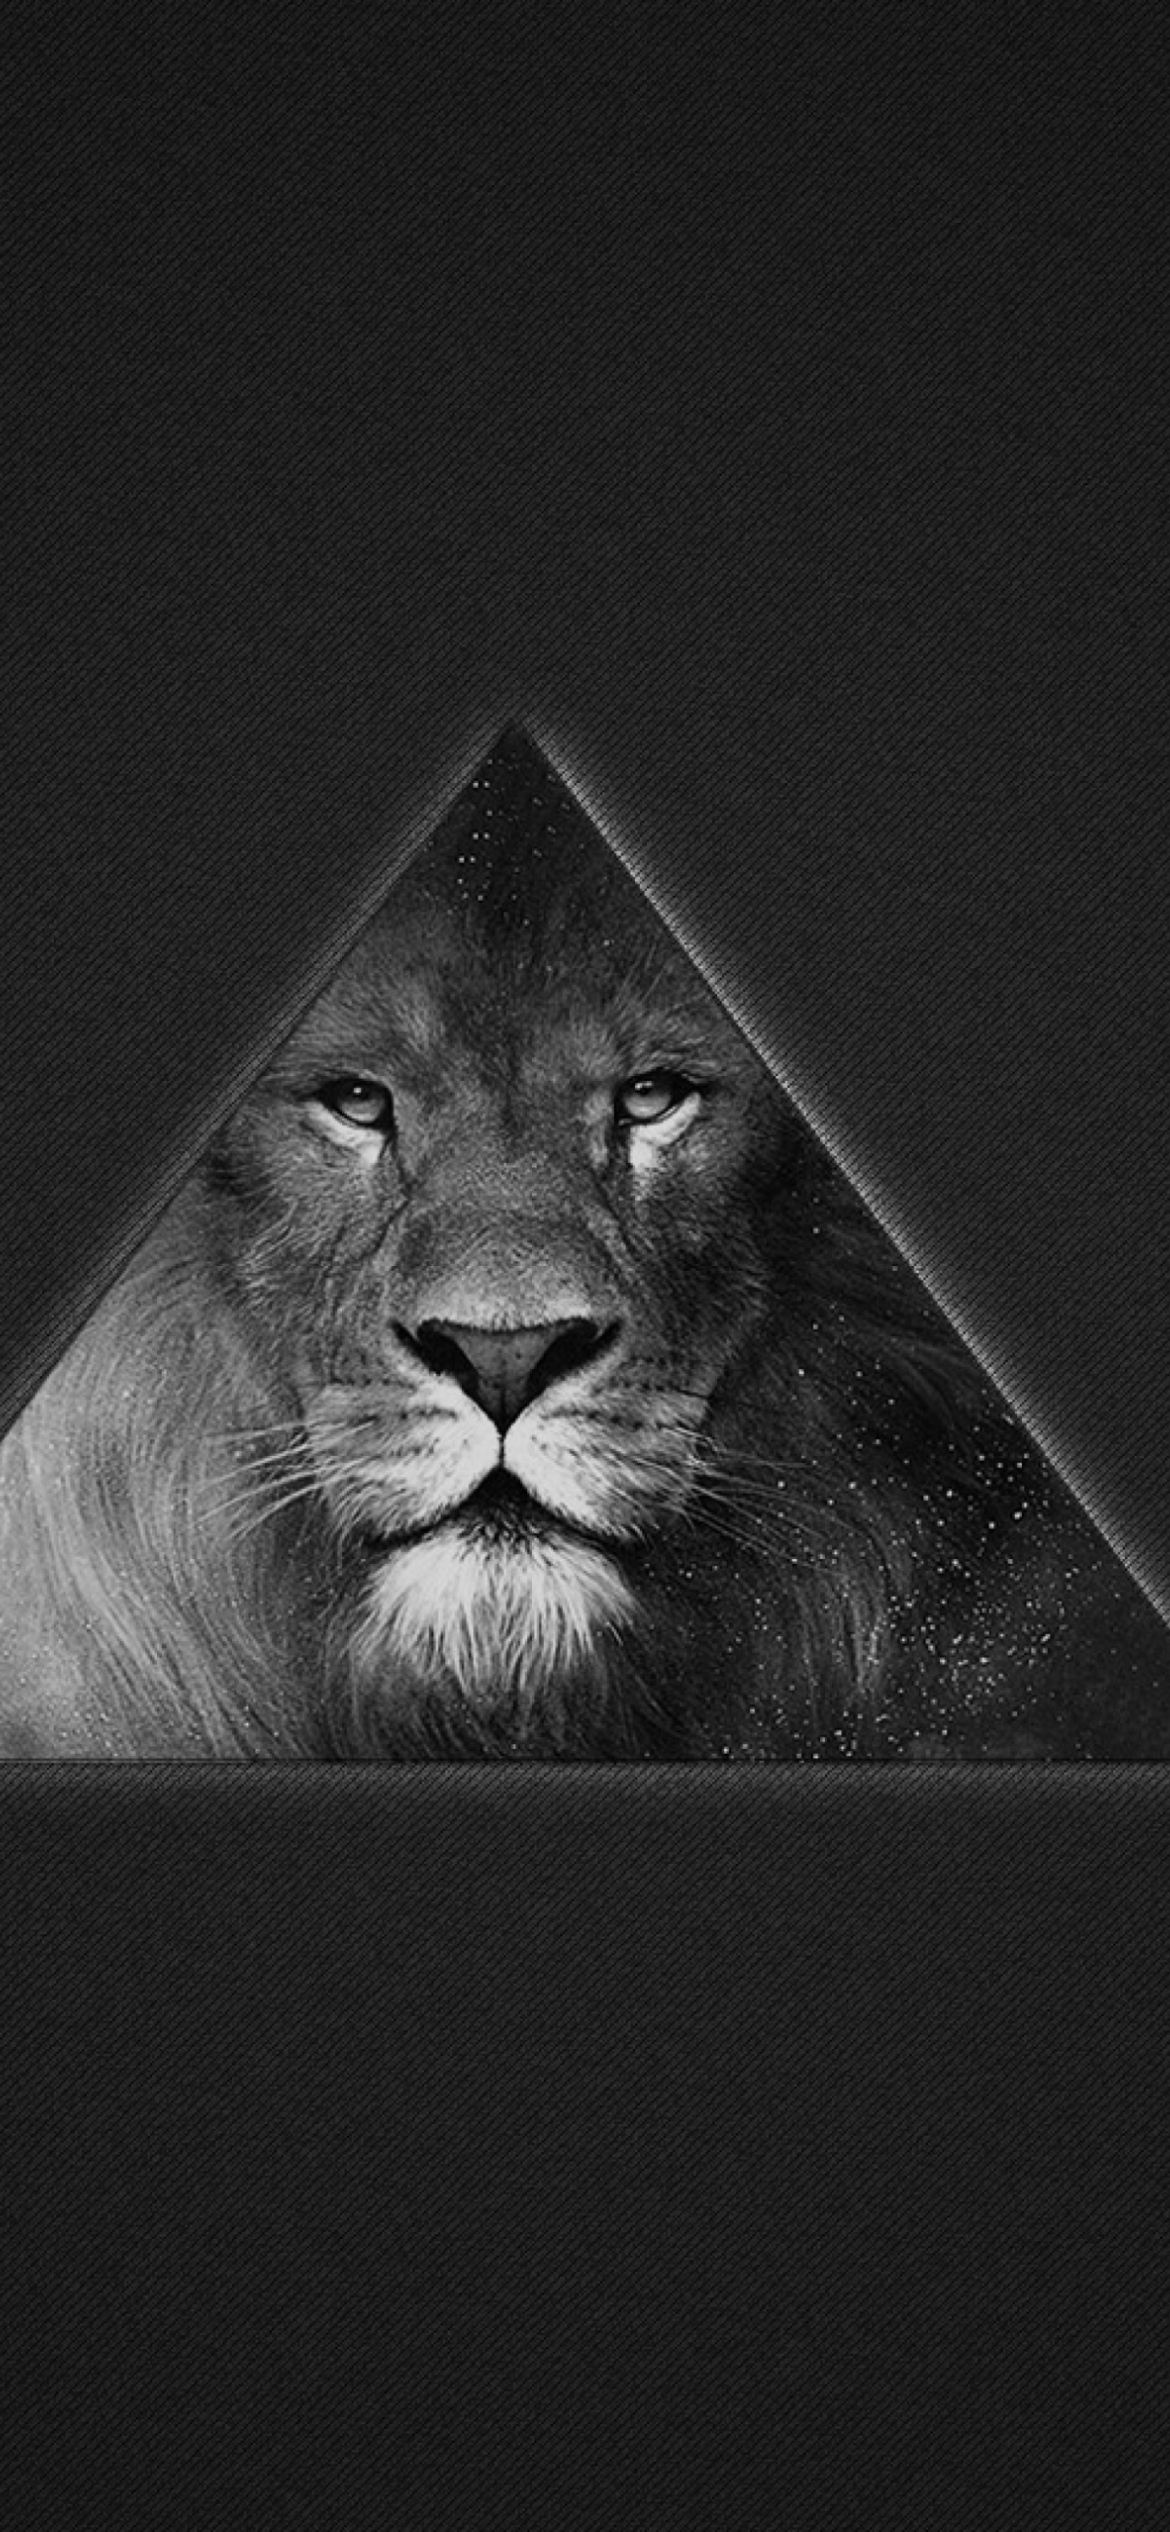 Lion's Black And White Triangle wallpaper 1170x2532